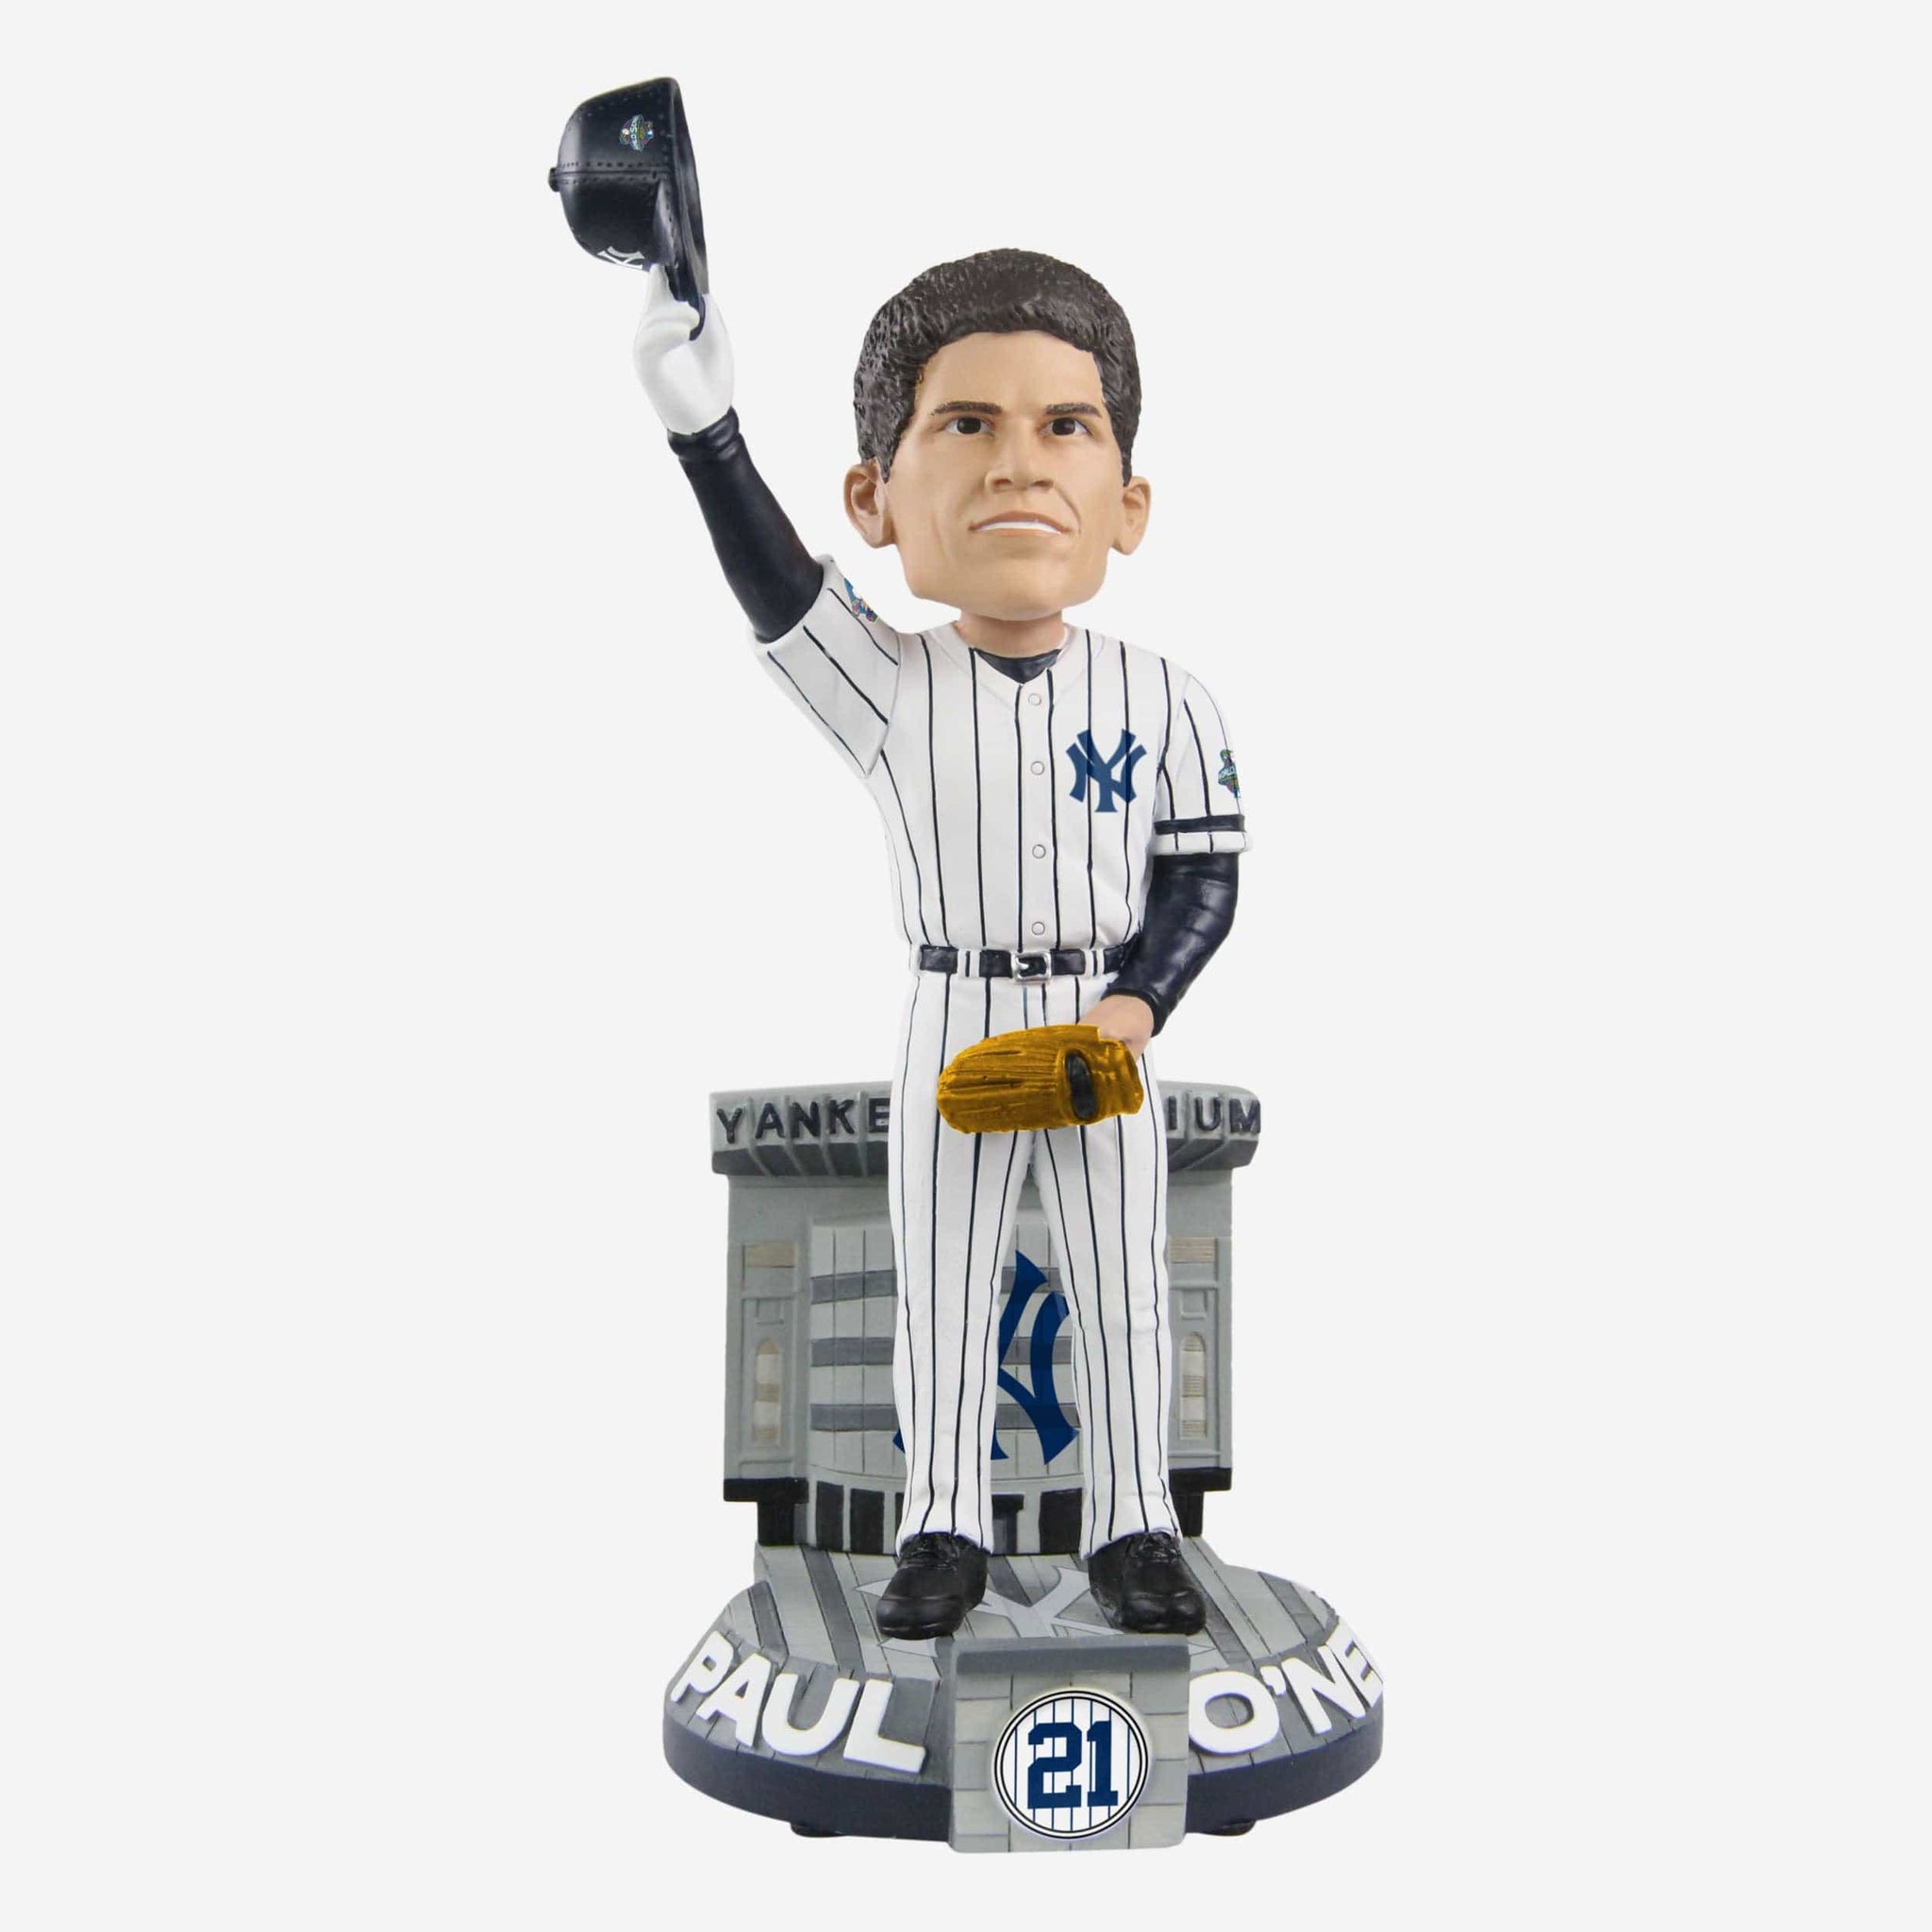 It's Paul O'Neill Bobblehead Day at The Stadium! #Yankees